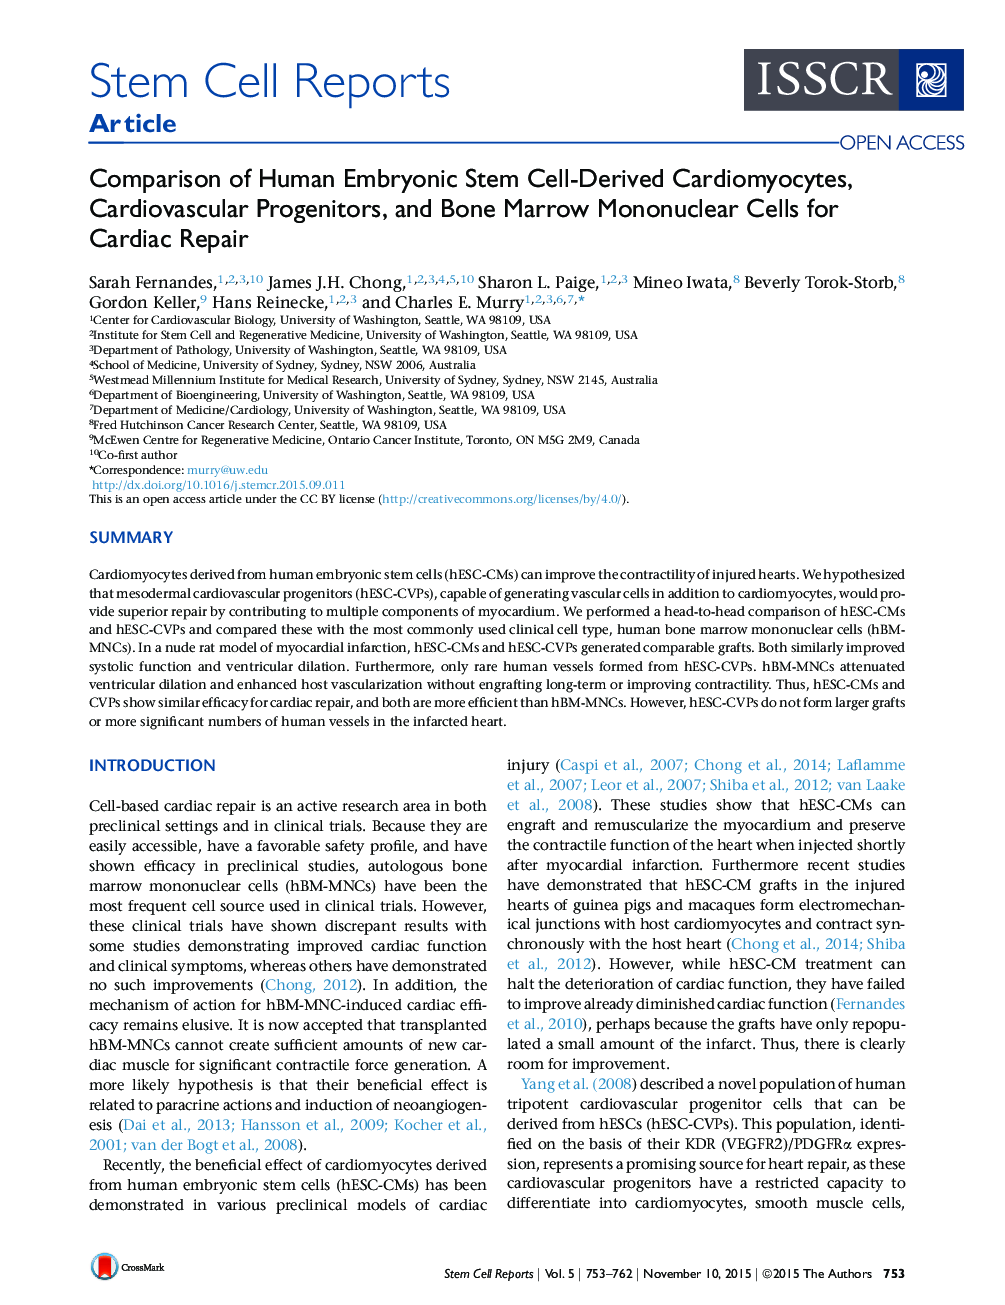 Comparison of Human Embryonic Stem Cell-Derived Cardiomyocytes, Cardiovascular Progenitors, and Bone Marrow Mononuclear Cells for Cardiac Repair 